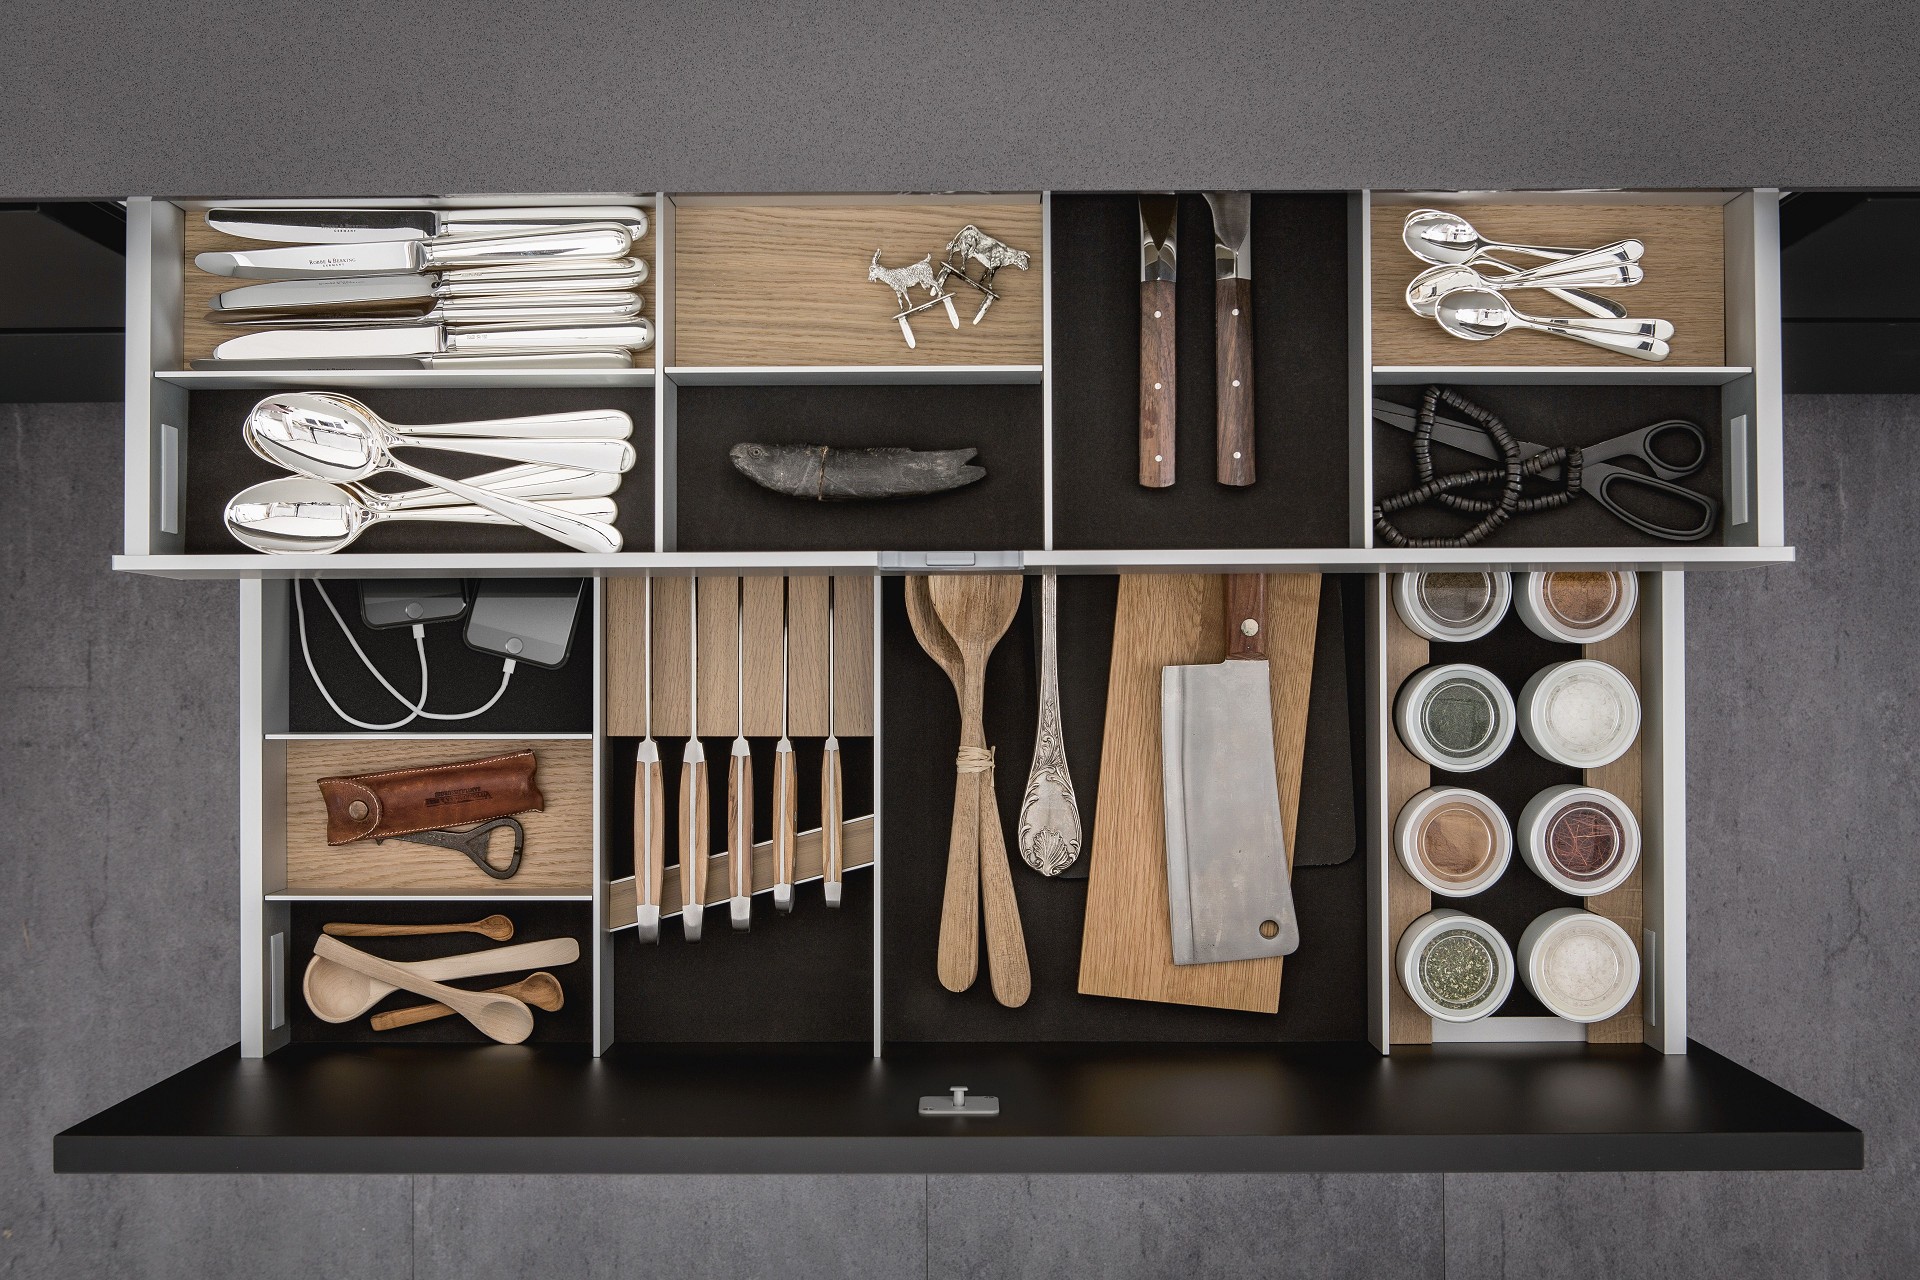 Cutlery inserts, porcelain jars, knife block and USB charging station for iPhones inside SieMatic drawers